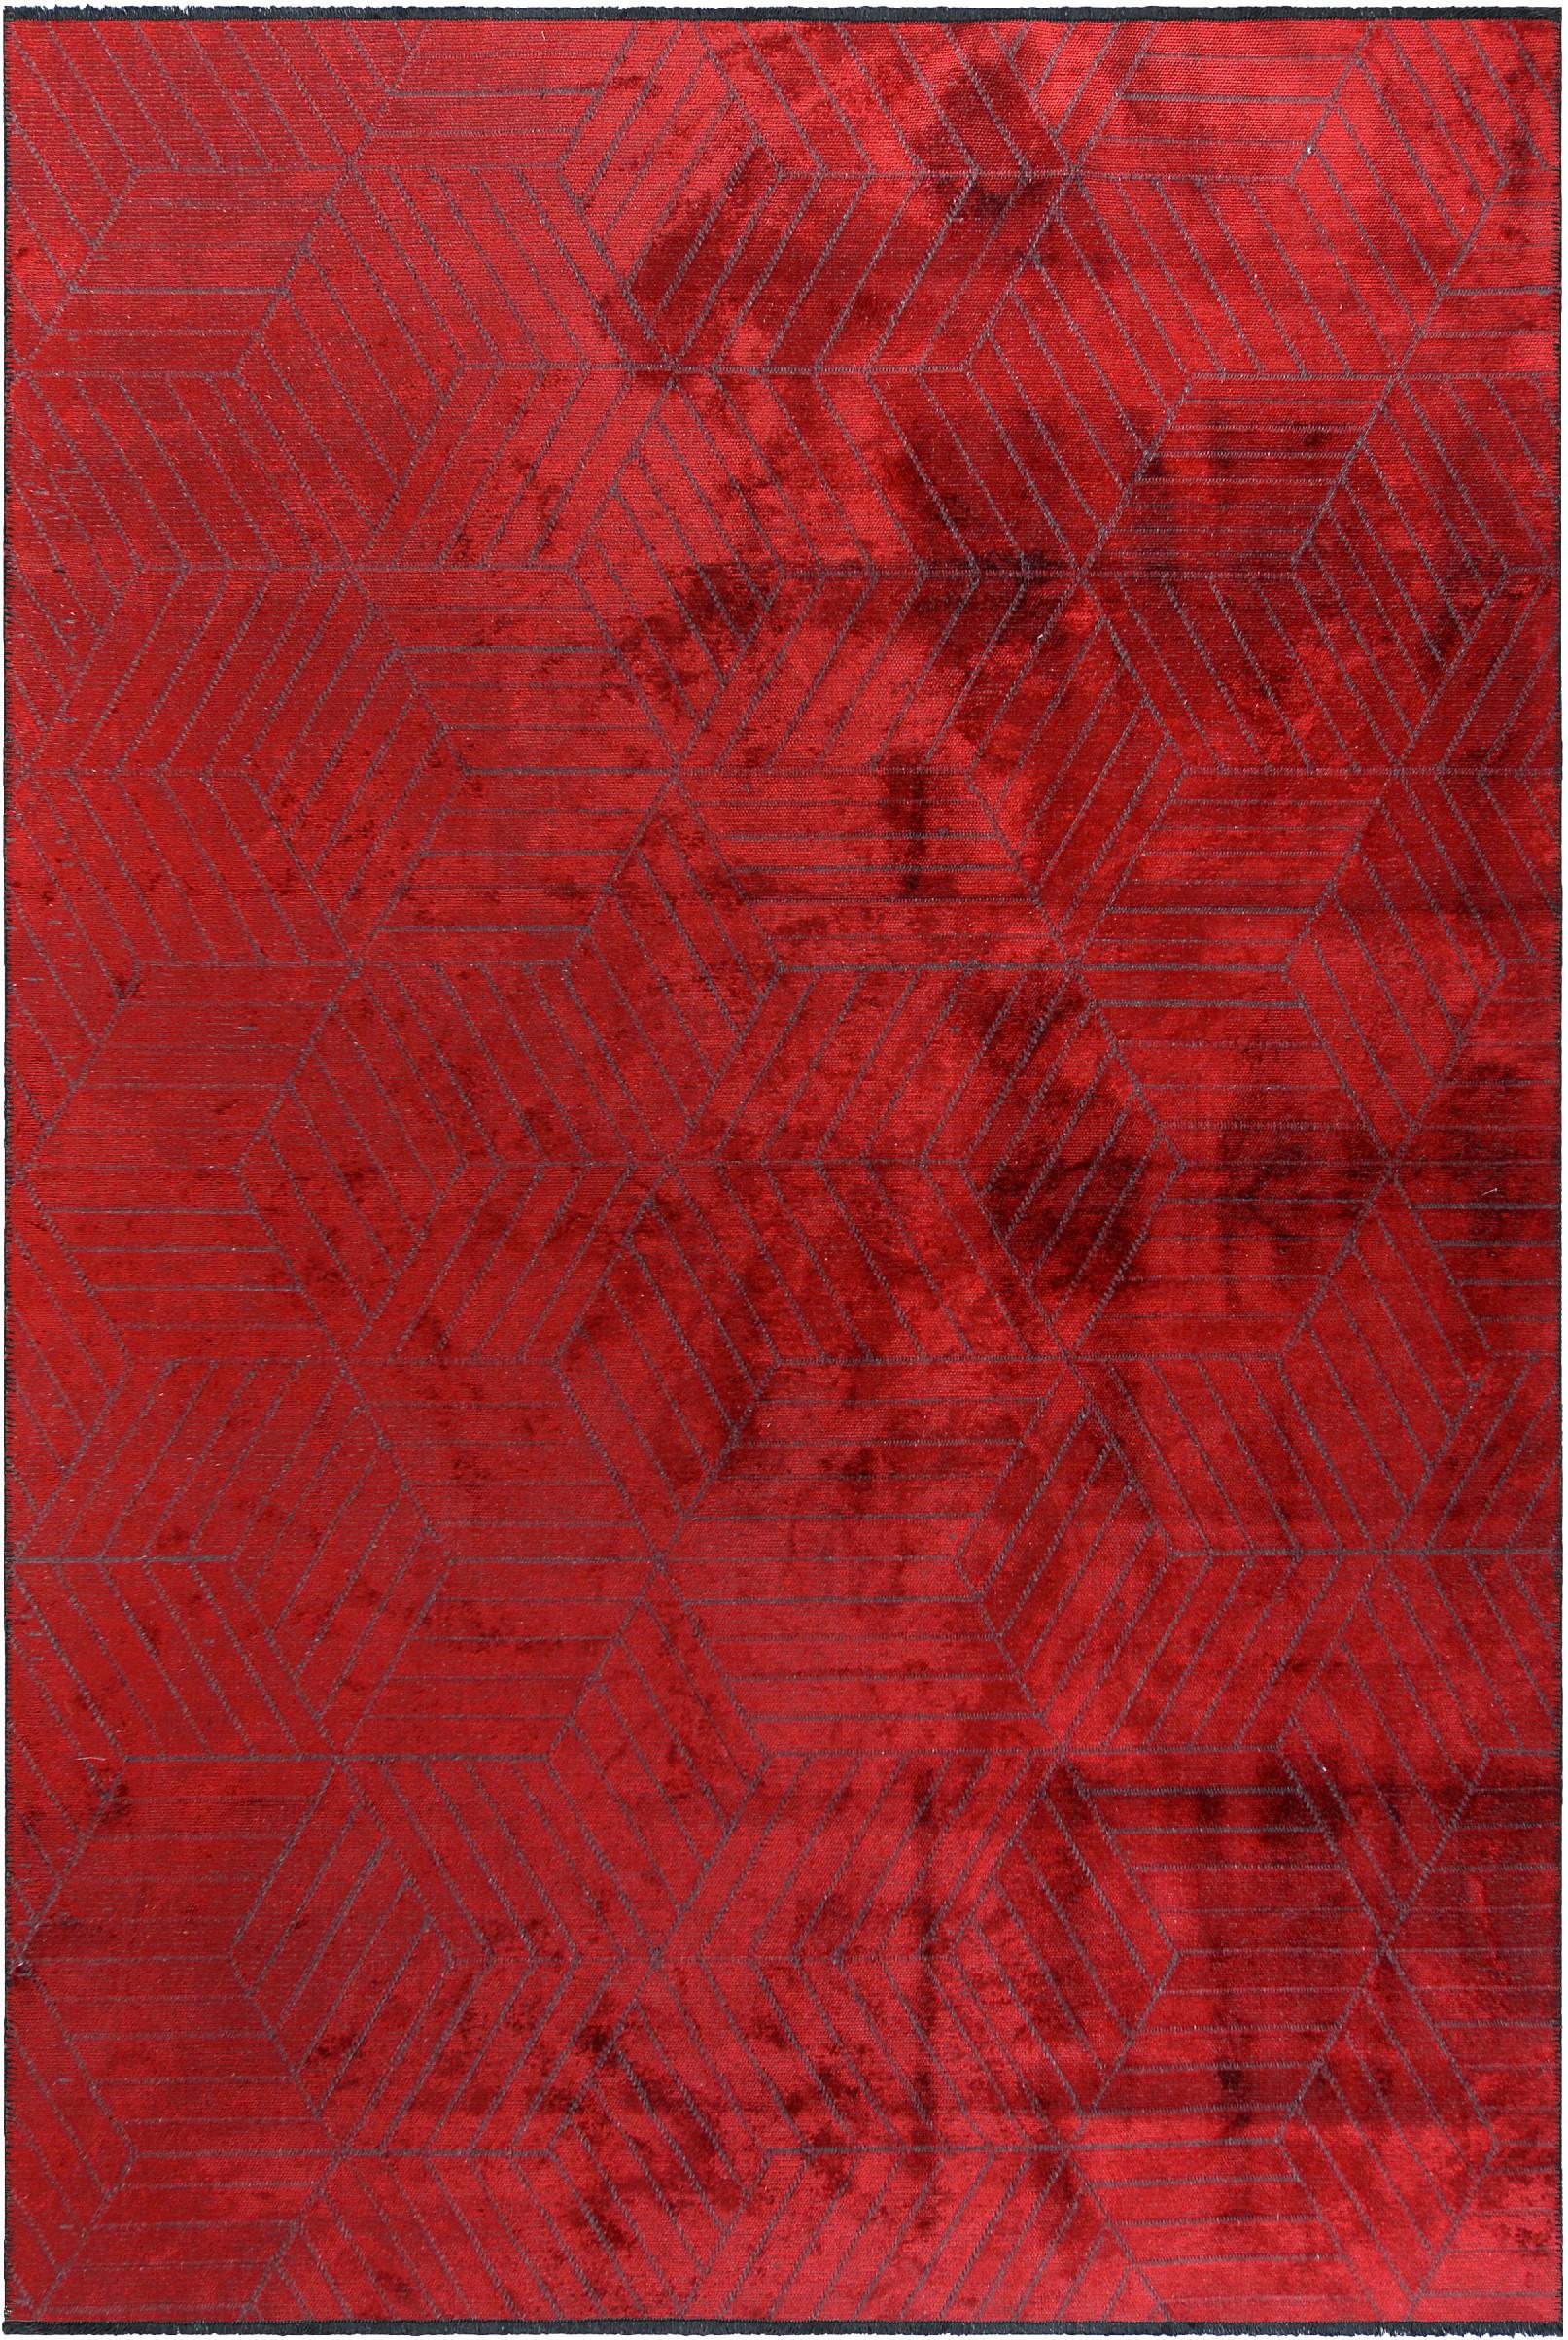 For Sale:  (Red) Contemporary Geometric Luxury Hand-Finished Area Rug